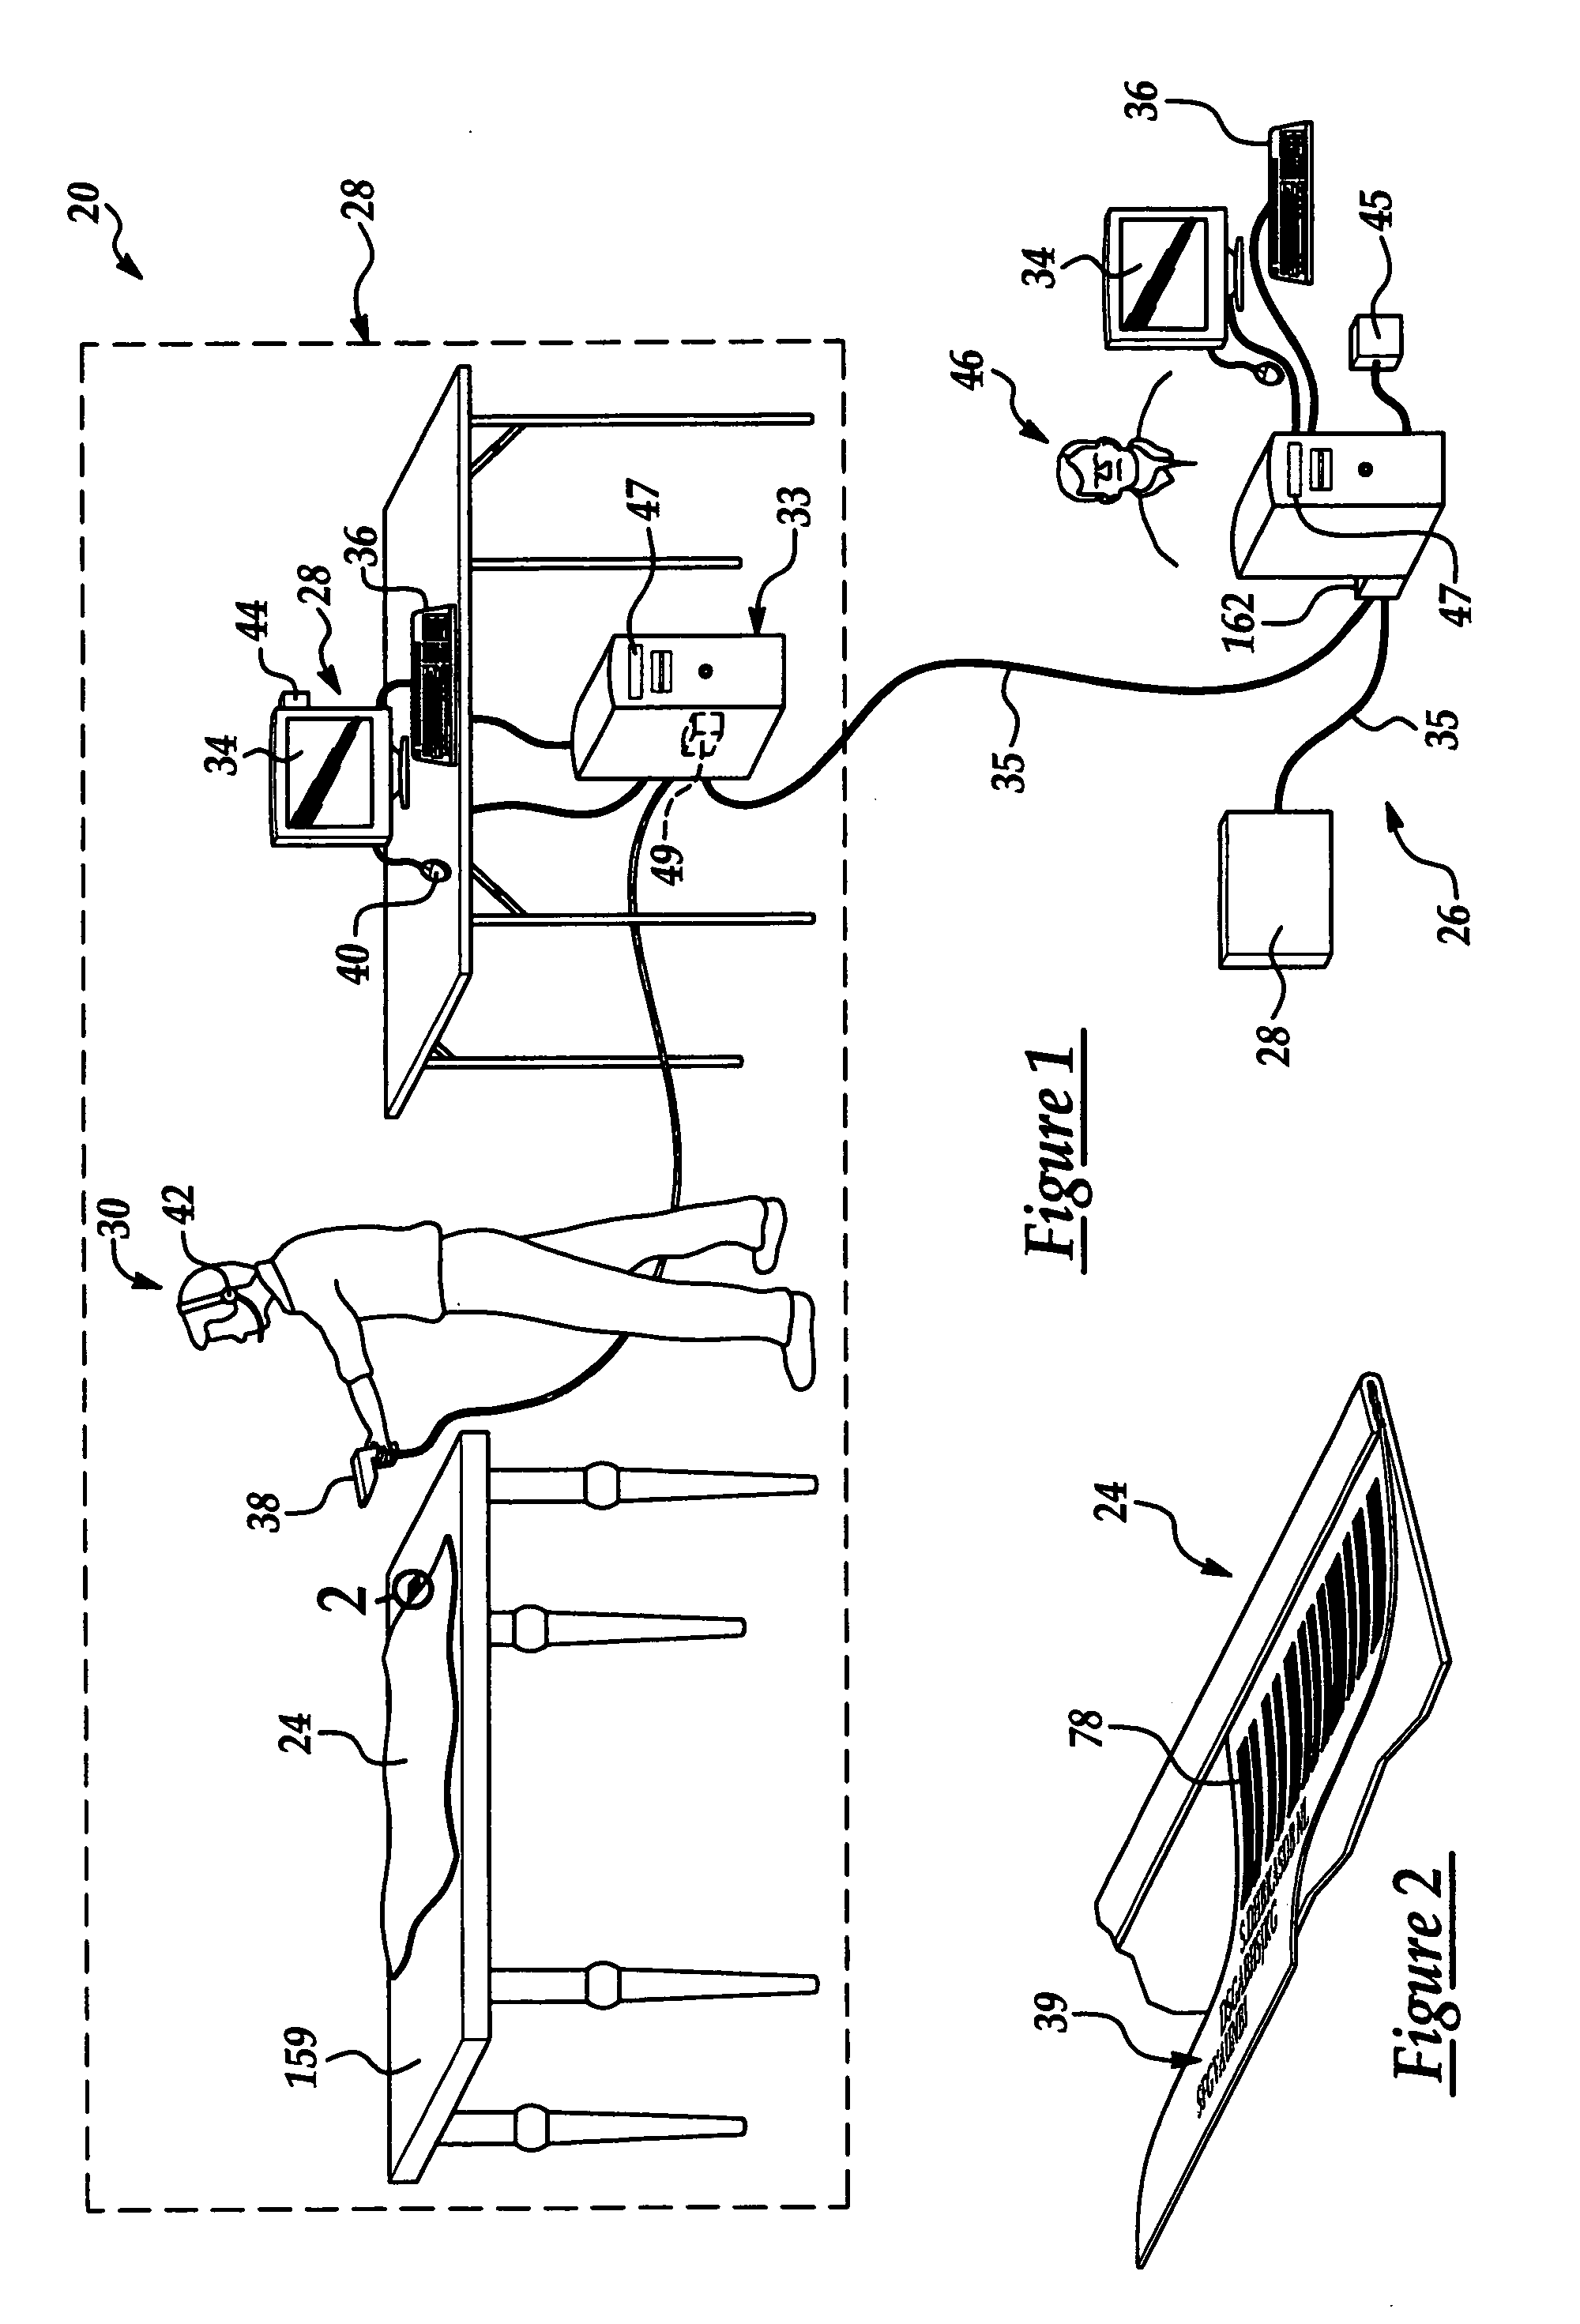 System and method for inspecting articles of manufacture